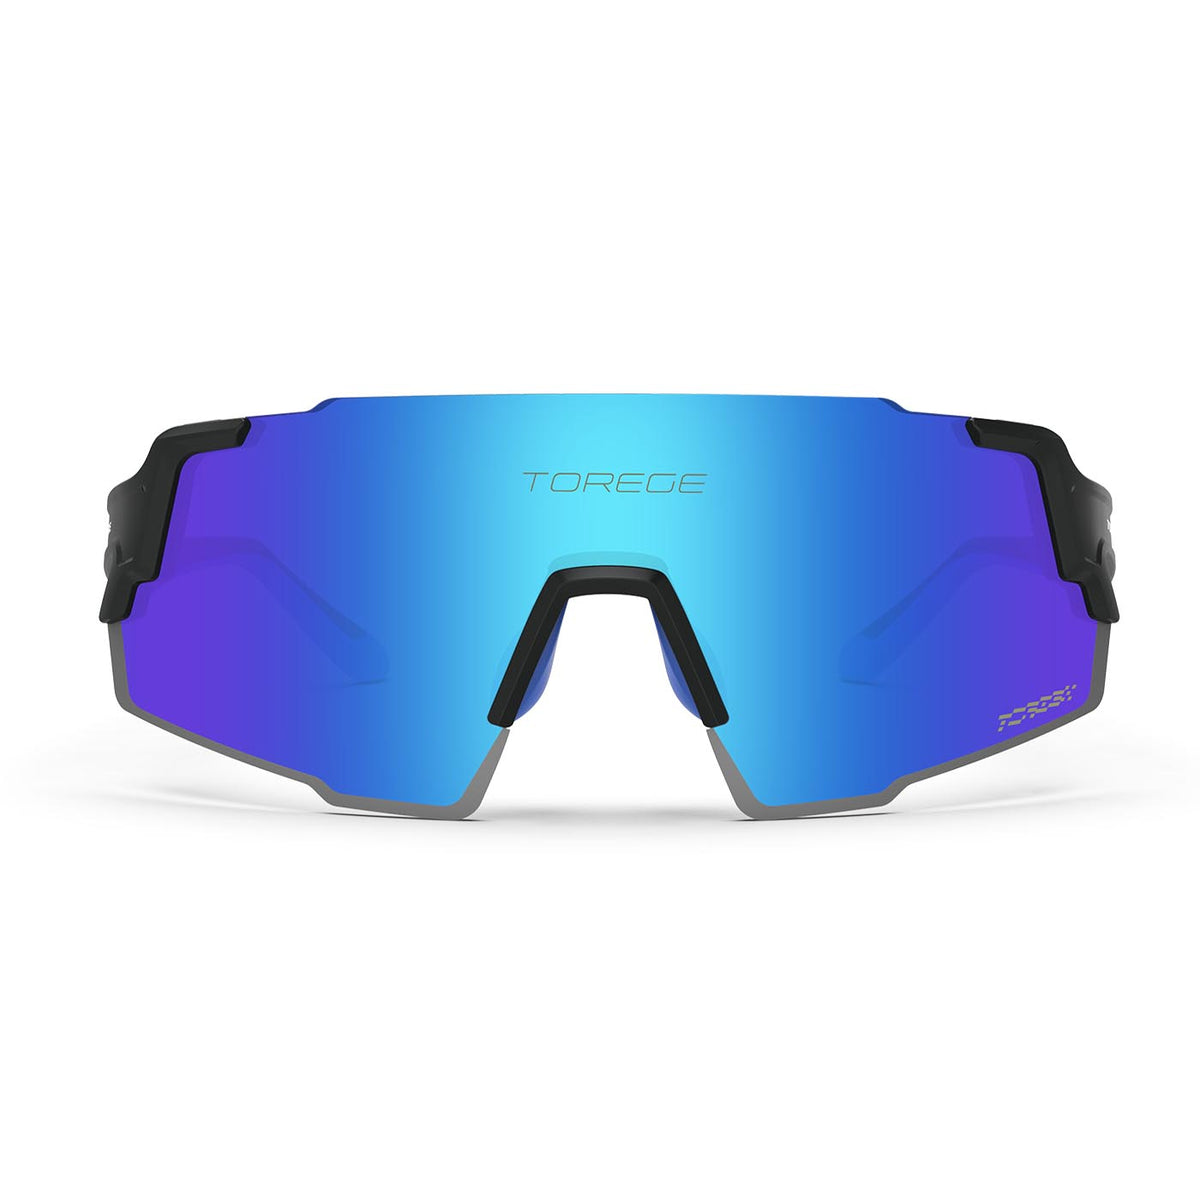 Blue Lightning Ultra Lightweight Sports Sunglasses For Men And Women With Lifetime Warranty